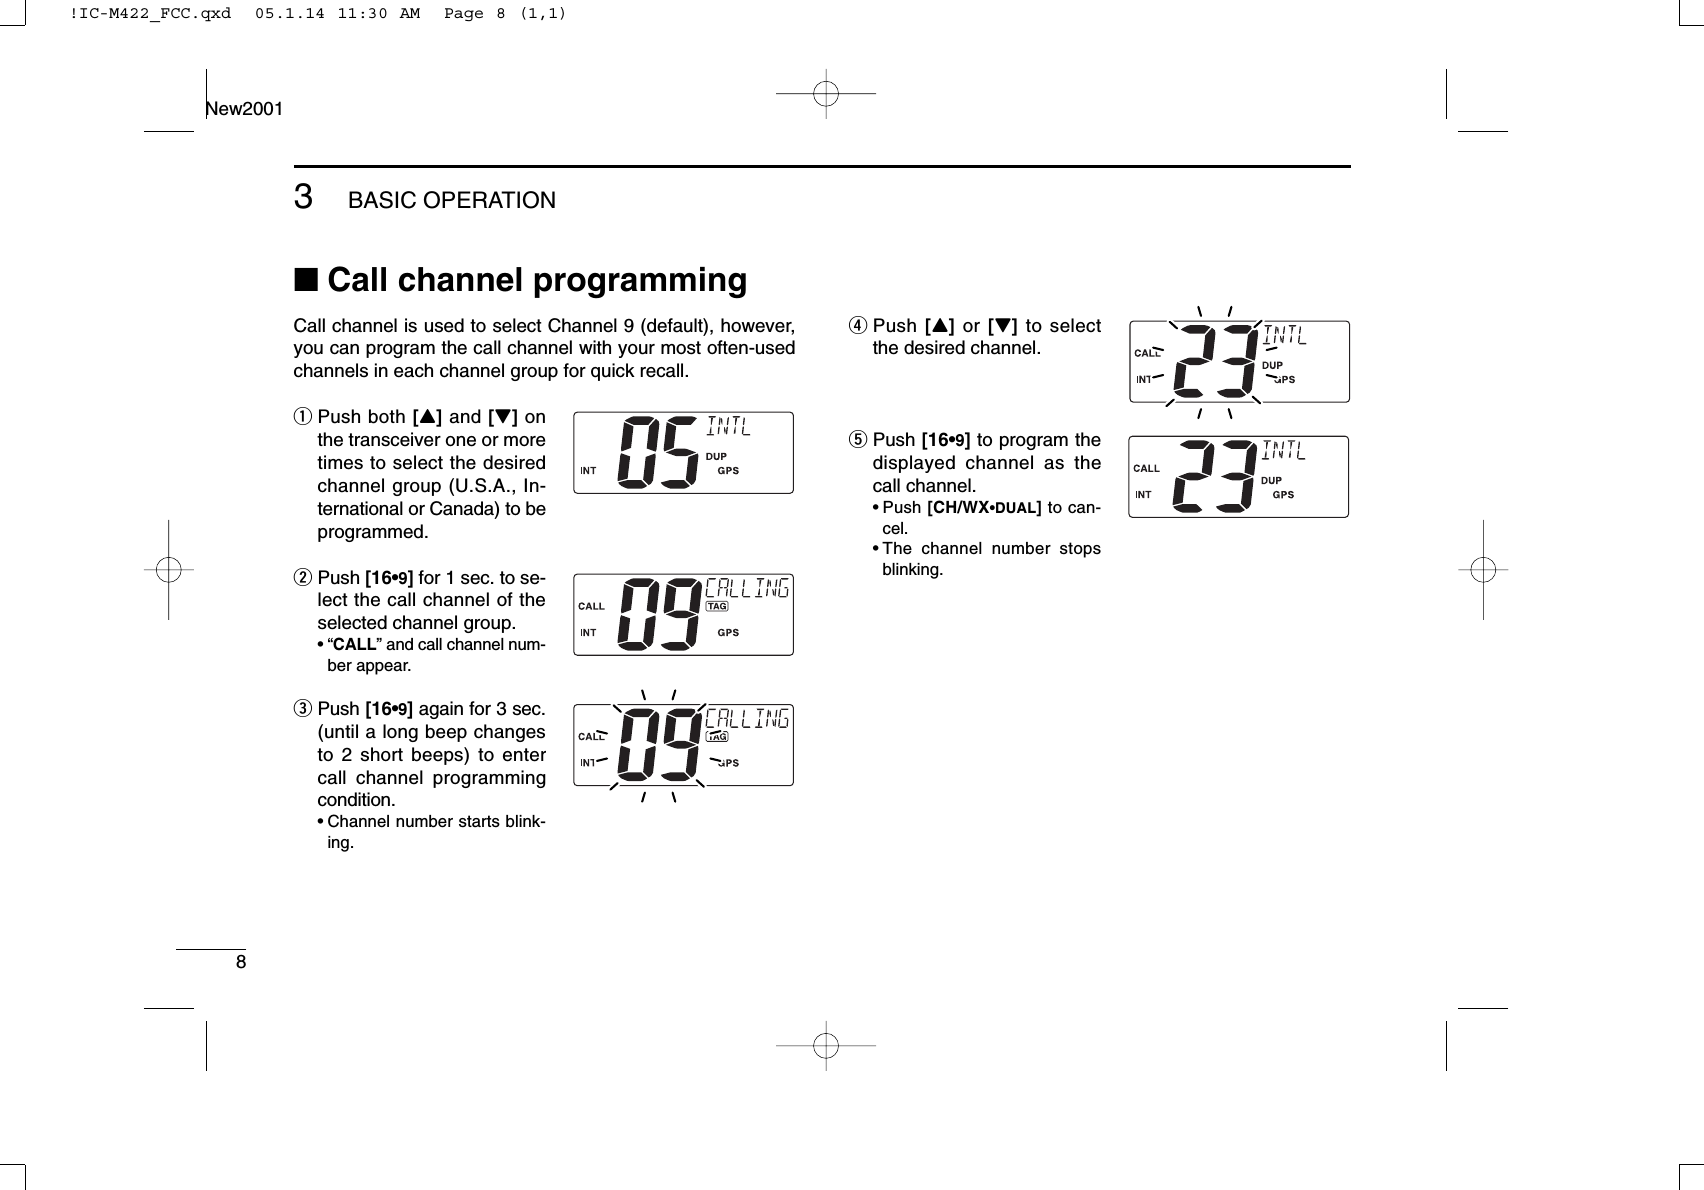 83BASIC OPERATIONNew2001■Call channel programmingCall channel is used to select Channel 9 (default), however,you can program the call channel with your most often-usedchannels in each channel group for quick recall.qPush both [Y]and [Z]onthe transceiver one or moretimes to select the desiredchannel group (U.S.A., In-ternational or Canada) to beprogrammed.wPush [16•9]for 1 sec. to se-lect the call channel of theselected channel group.•“CALL” and call channel num-ber appear.ePush [16•9]again for 3 sec.(until a long beep changesto 2 short beeps) to entercall channel programmingcondition.•Channel number starts blink-ing.rPush [Y]or [Z]to selectthe desired channel.tPush [16•9]to program thedisplayed channel as thecall channel.•Push [CH/WX•DUAL]to can-cel.•The channel number stopsblinking.!IC-M422_FCC.qxd  05.1.14 11:30 AM  Page 8 (1,1)